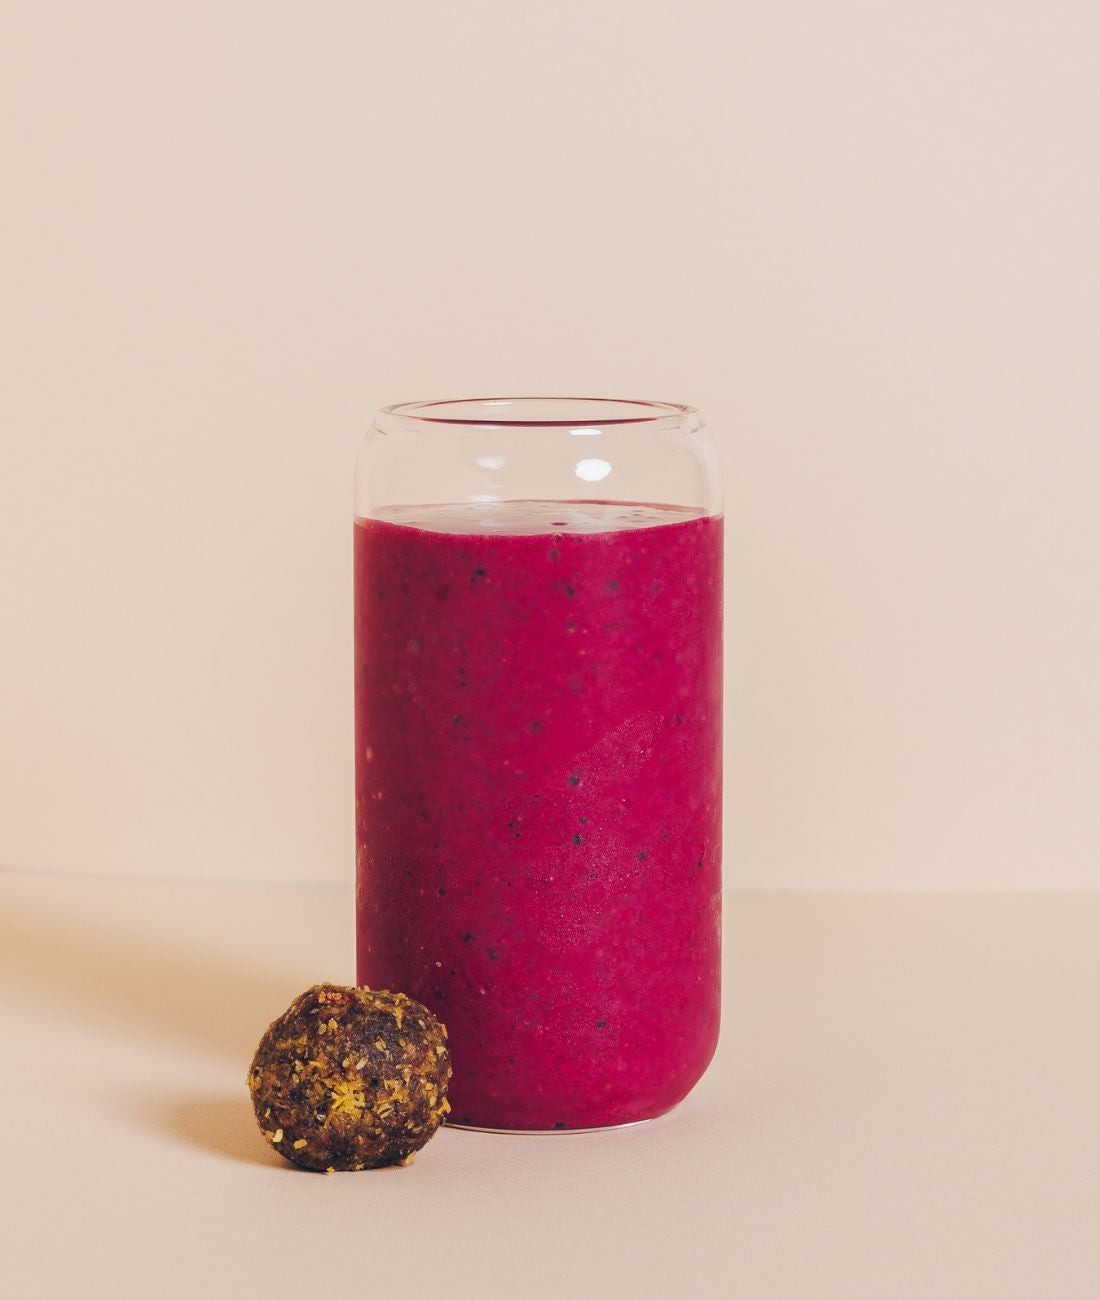 Smoothie Booster by Blender Bombs